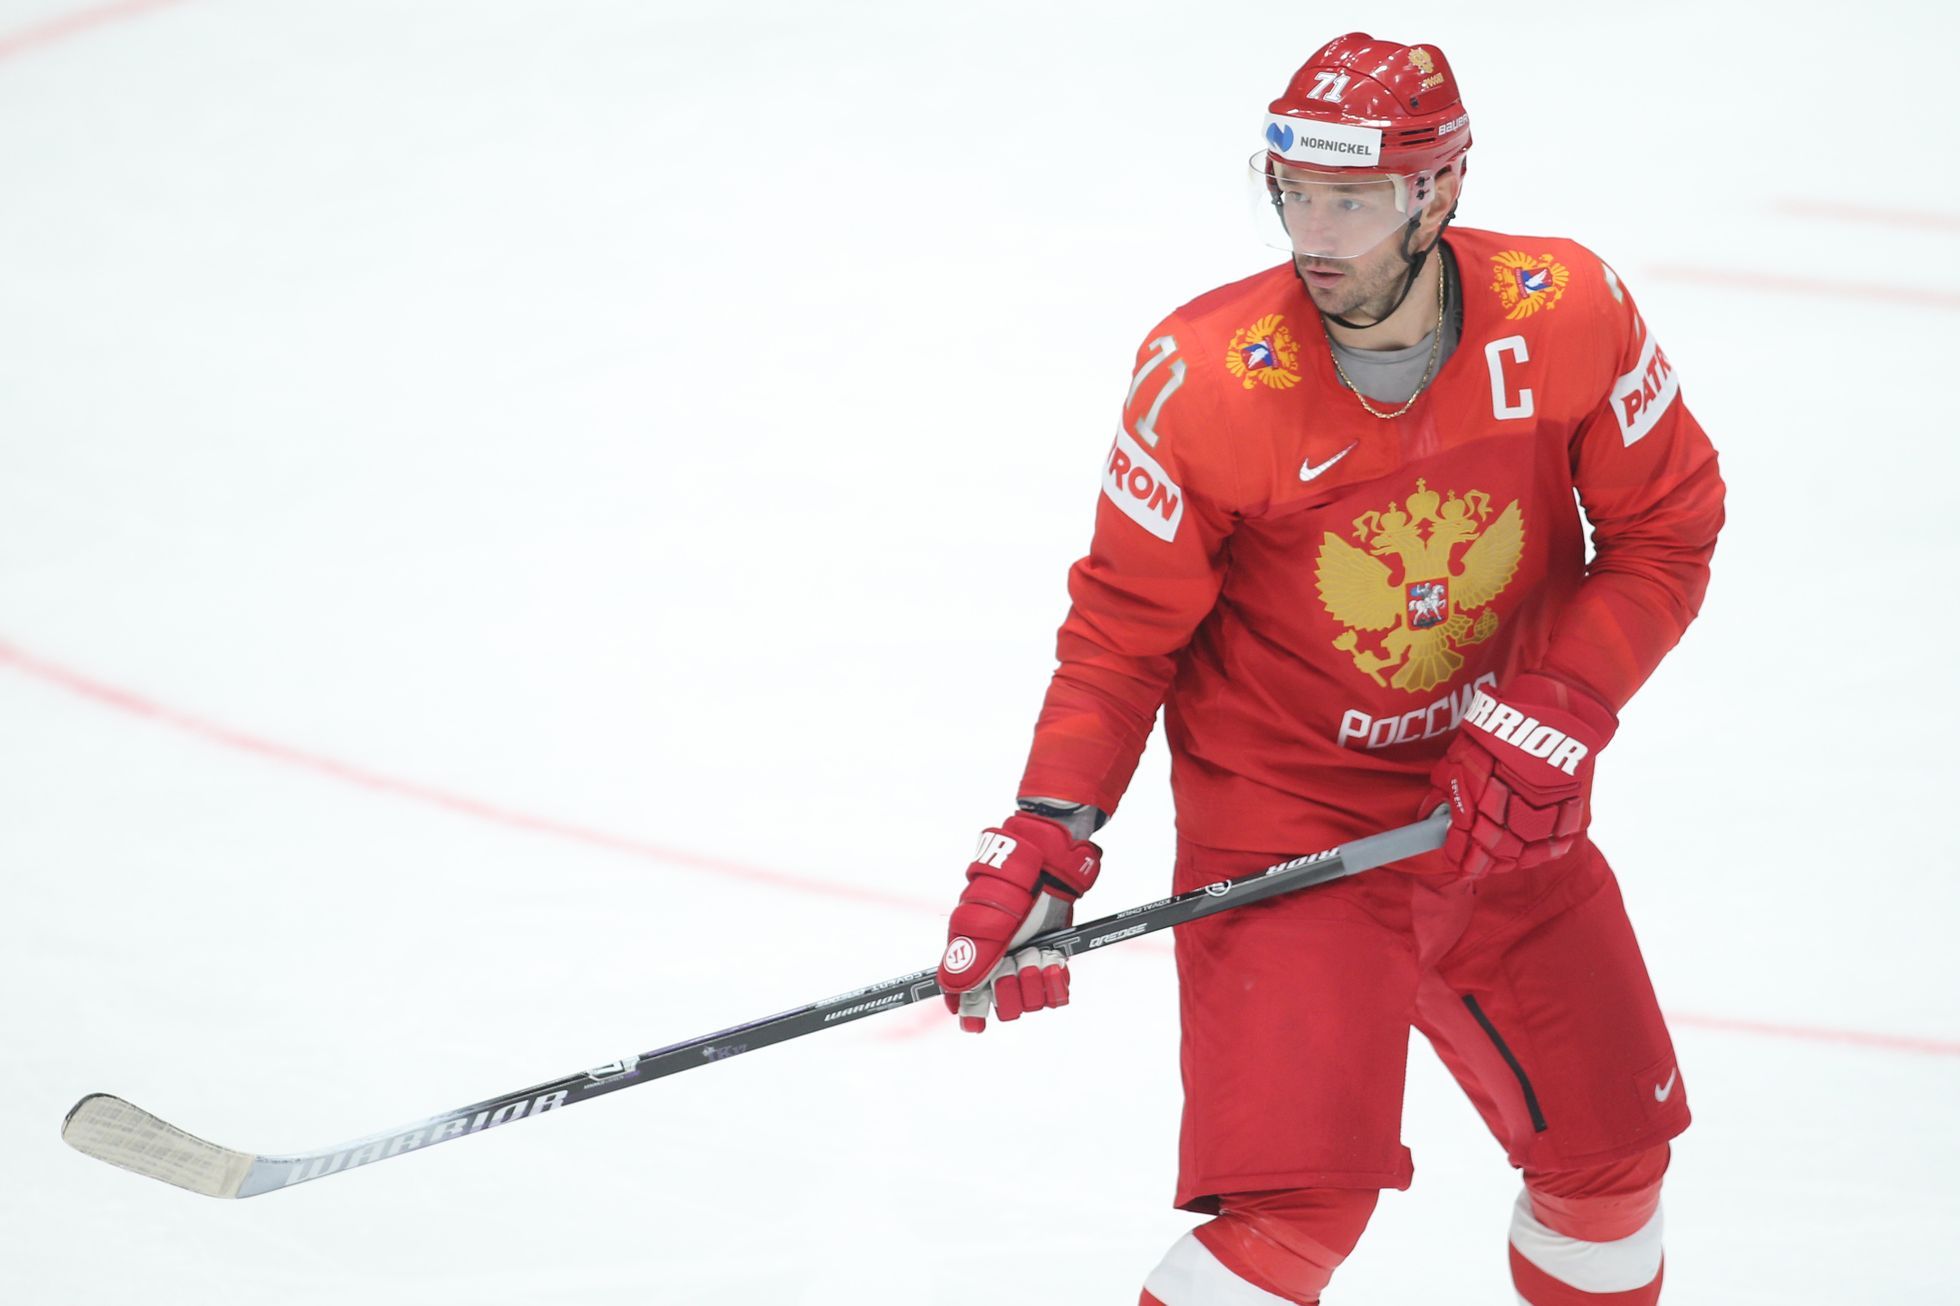 Kovalchuk will be the general manager of the Russian hockey team for the Olympics